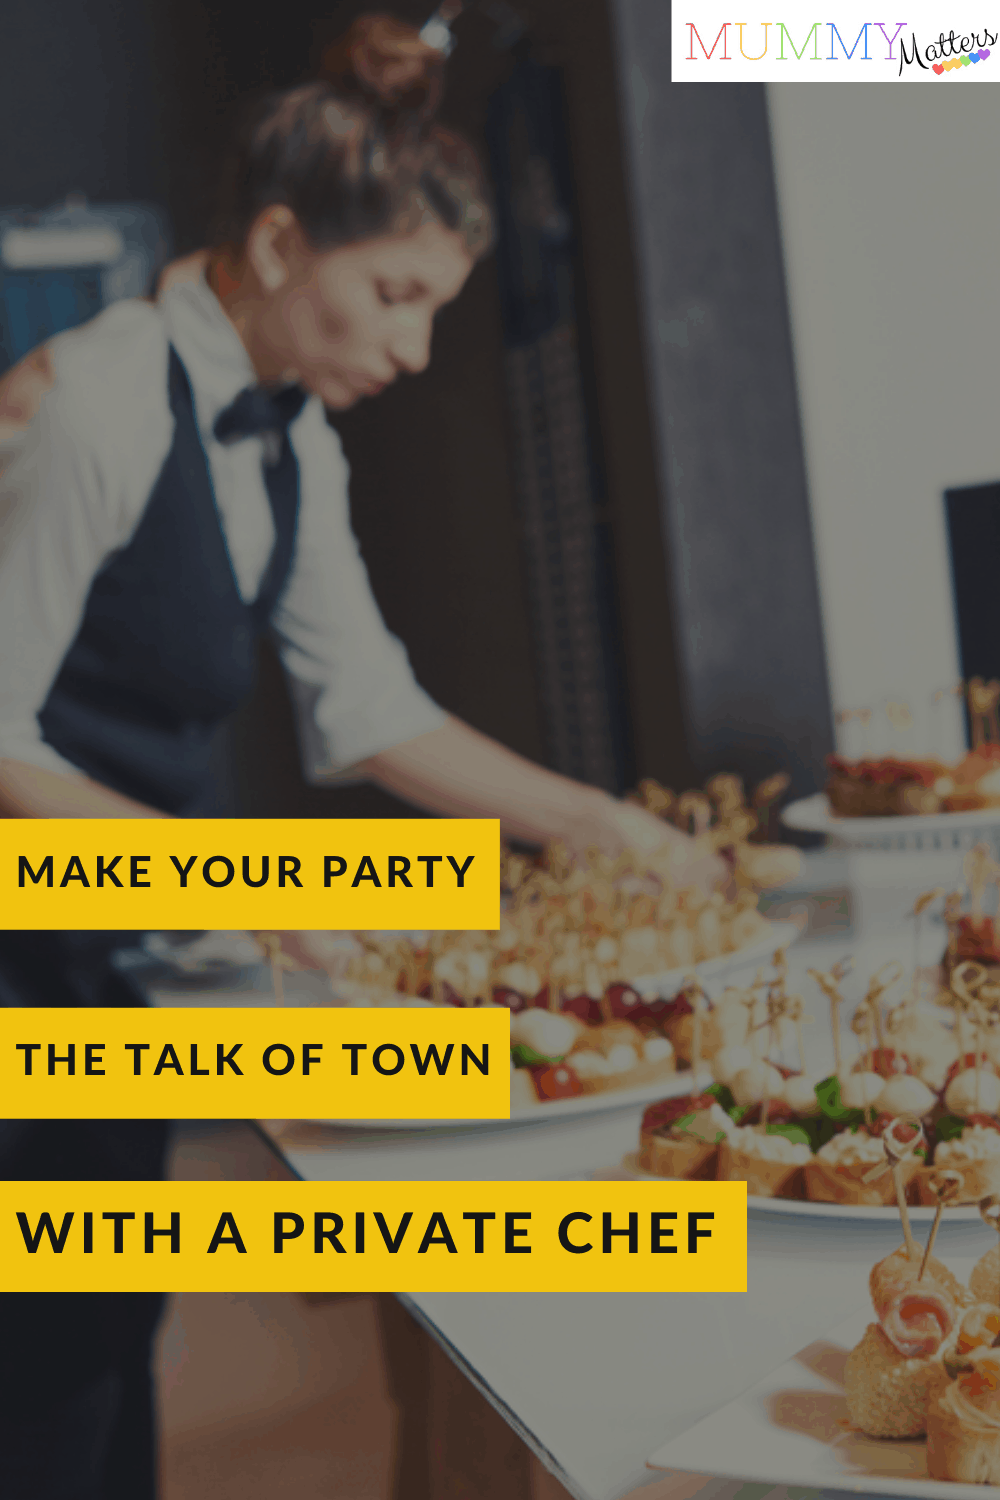 Food always makes or breaks an event. Hiring a private chef will not only help you enjoy the part but also whip up a menu that will cater to everyone’s likings.